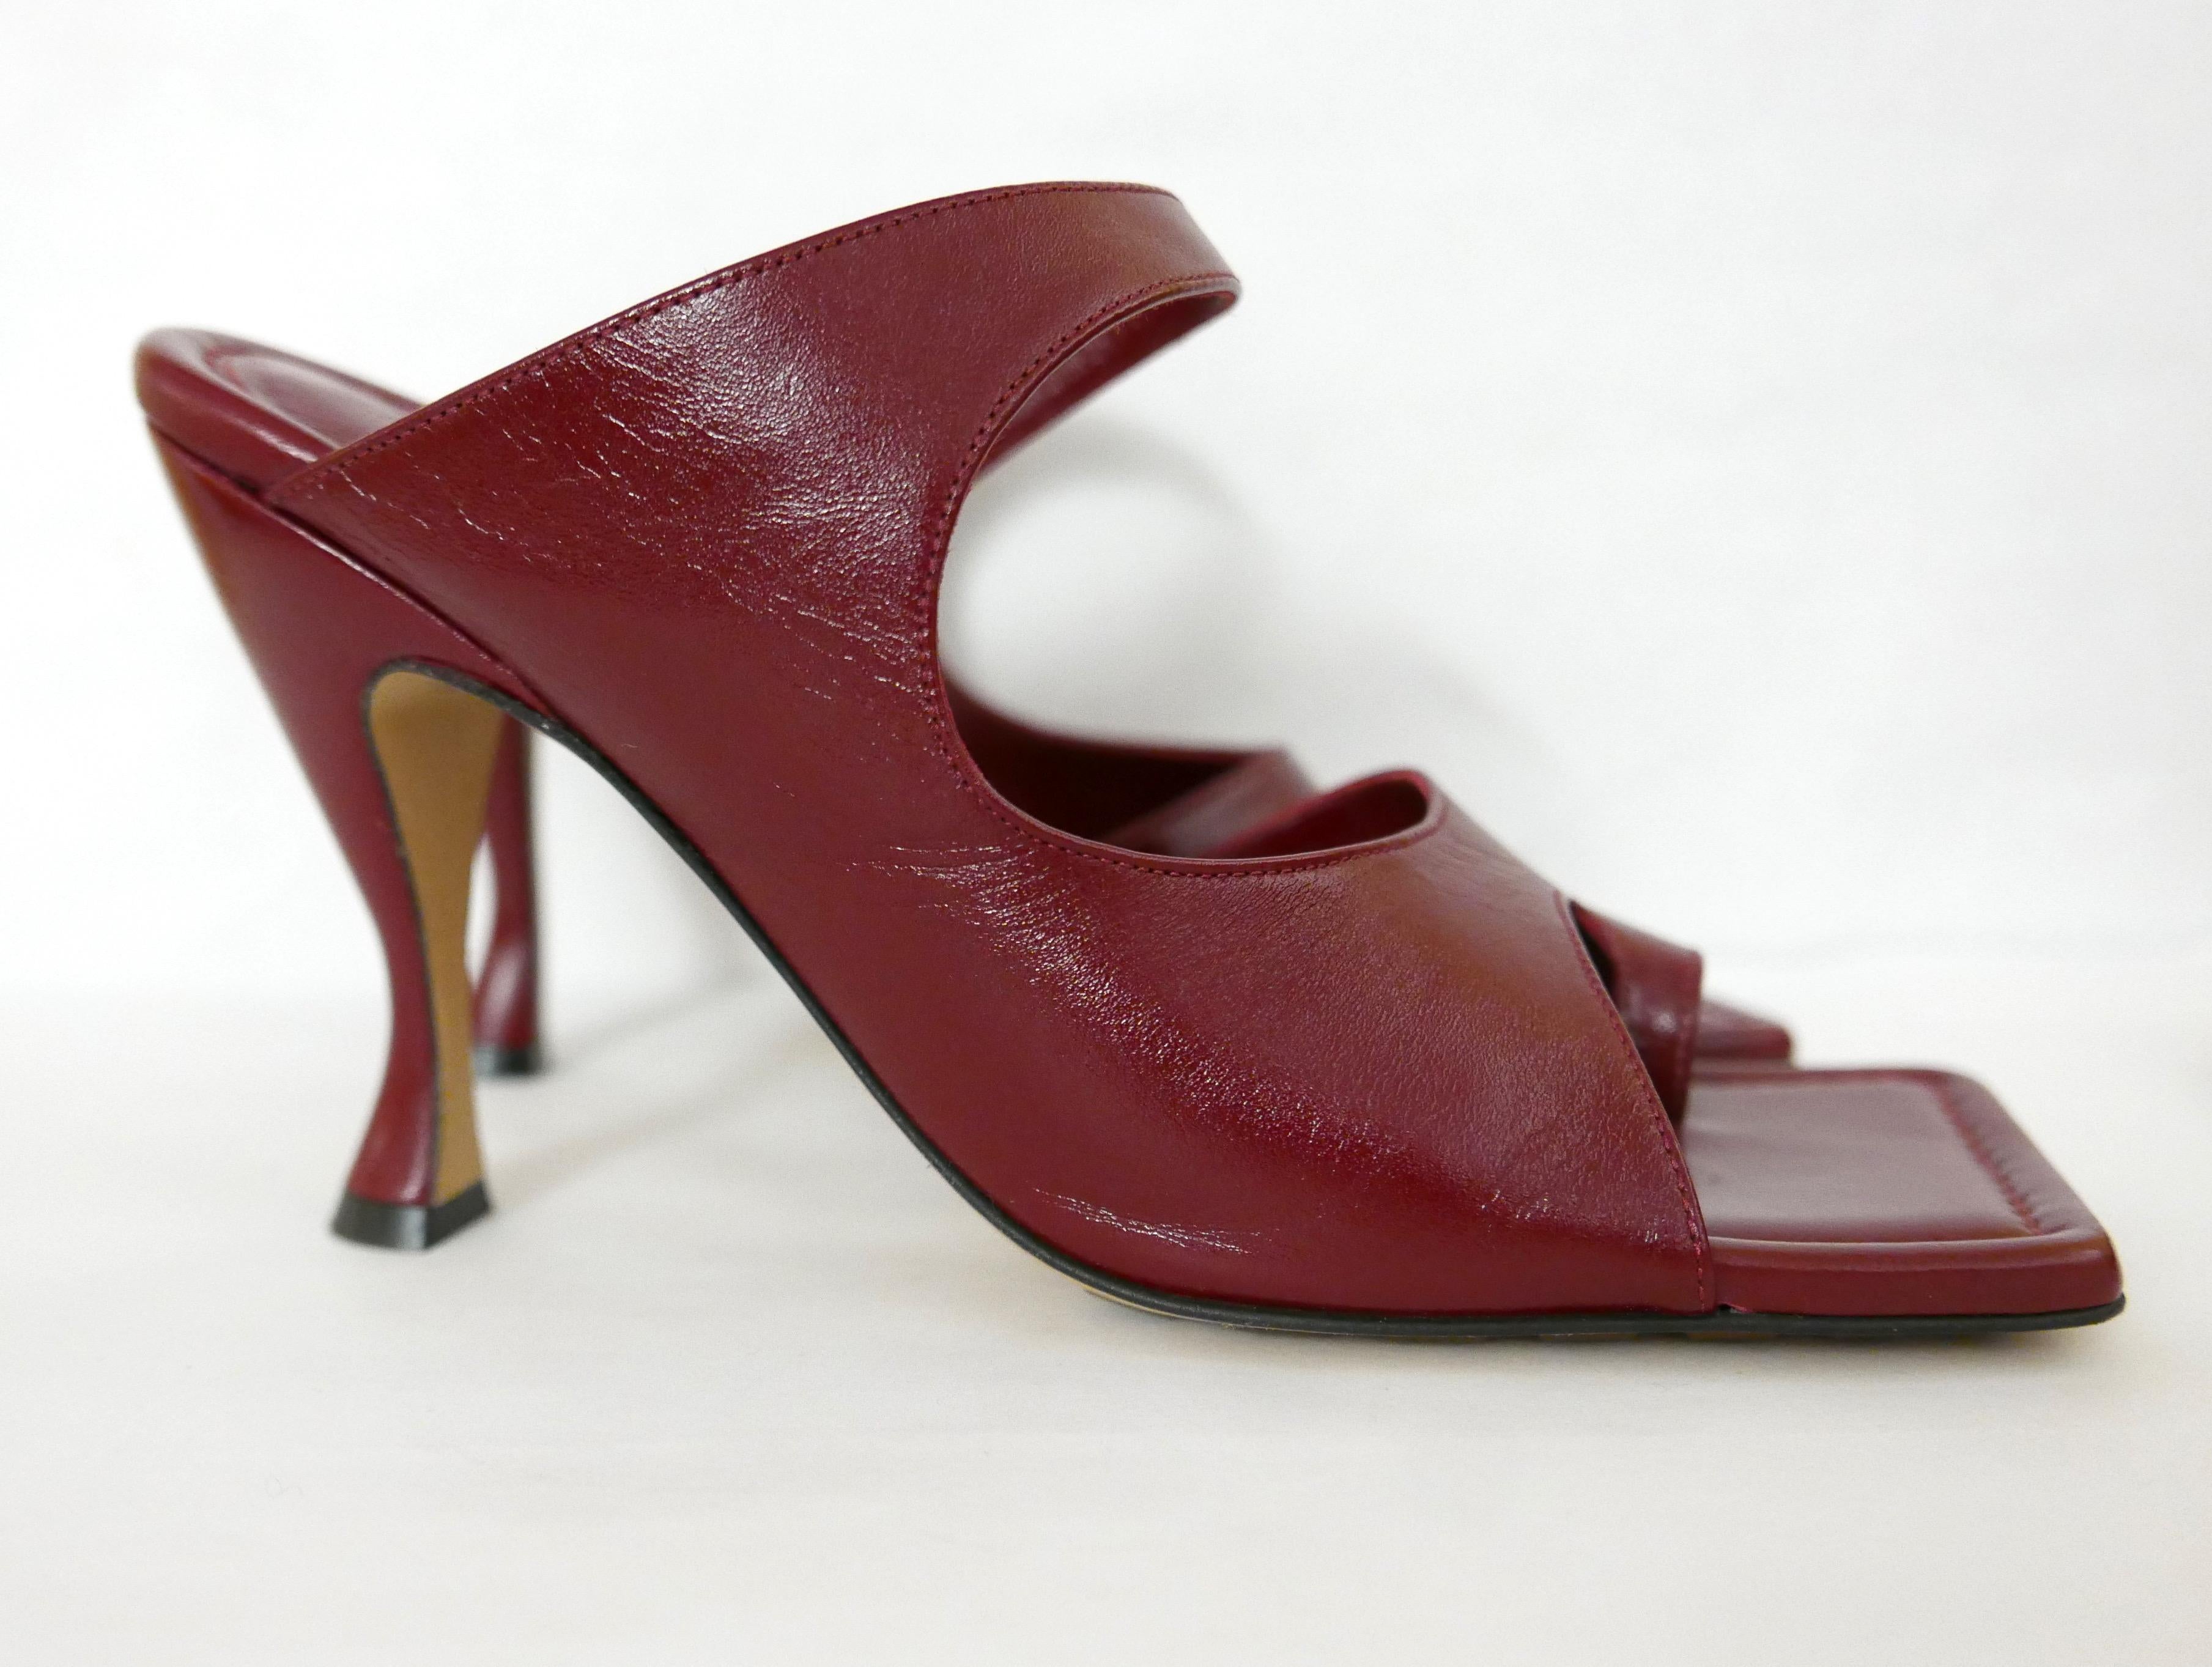 Super chic and sexy Bottega Veneta red leather mules from Resort 2020. 

Unworn with box, dustbags, spare heel tips and leaflet. 

Made from glossy ox blood red patent leather, they have a cool asymmetric cutaway shape, signature square toe with